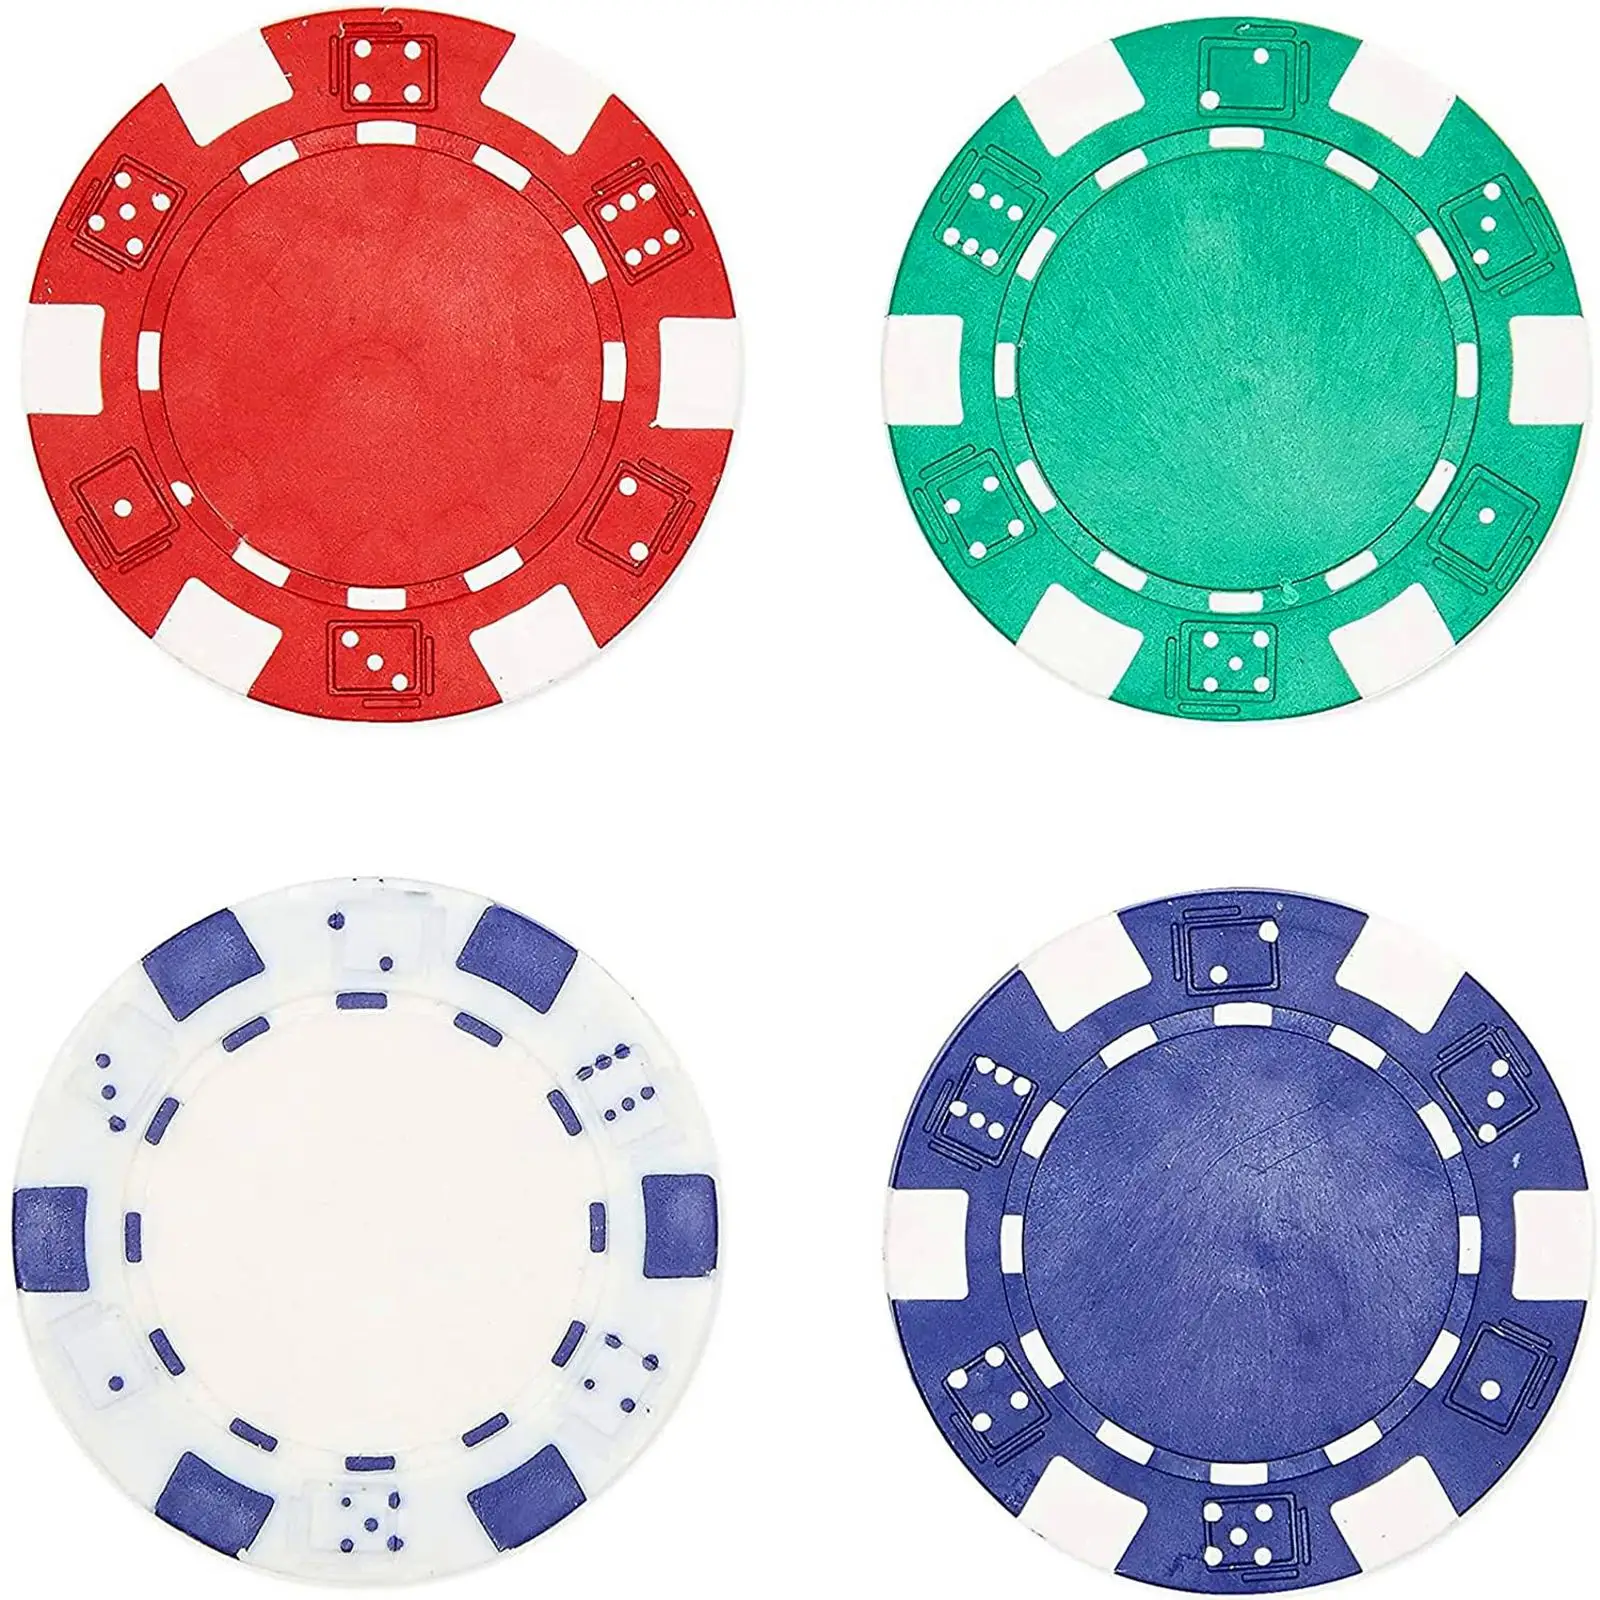 100 Pieces 4cm Poker Chips Bingo Chips Counting Chips for Poker Bingo Accs